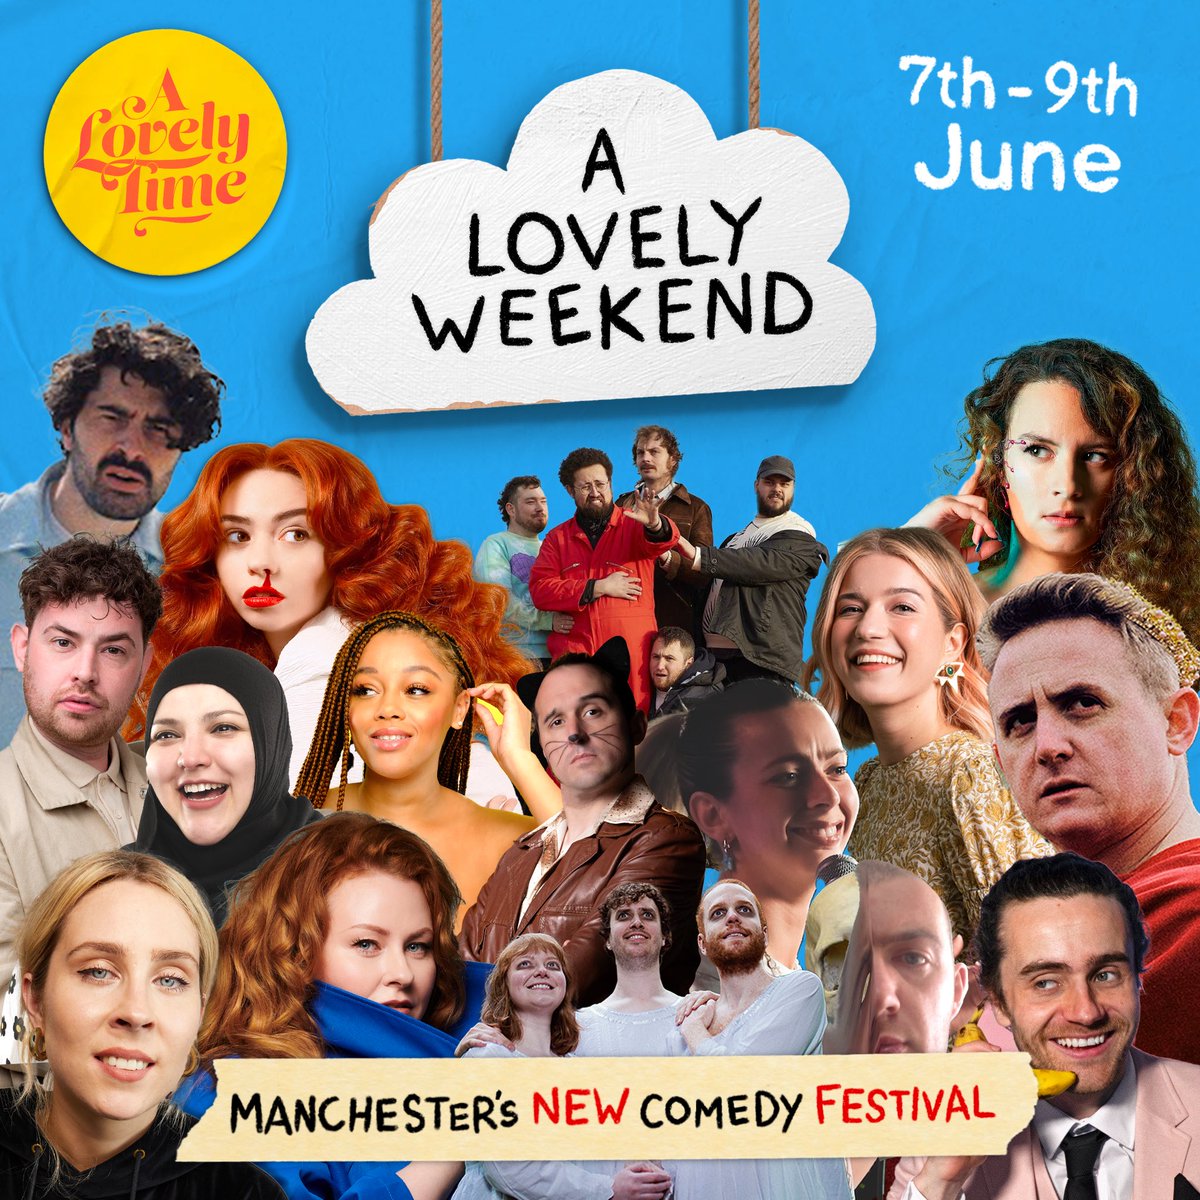 Missed out on @machcomedyfest this weekend? Or even if you just want more Mach-esque vibes? Come on down to @FSCMCR in June for A Lovely Weekend. Manchester’s new comedy festival. 🎟 weekend passes: seetickets.com/event/a-lovely… 🎟 all shows: seetickets.com/tour/a-lovely-…